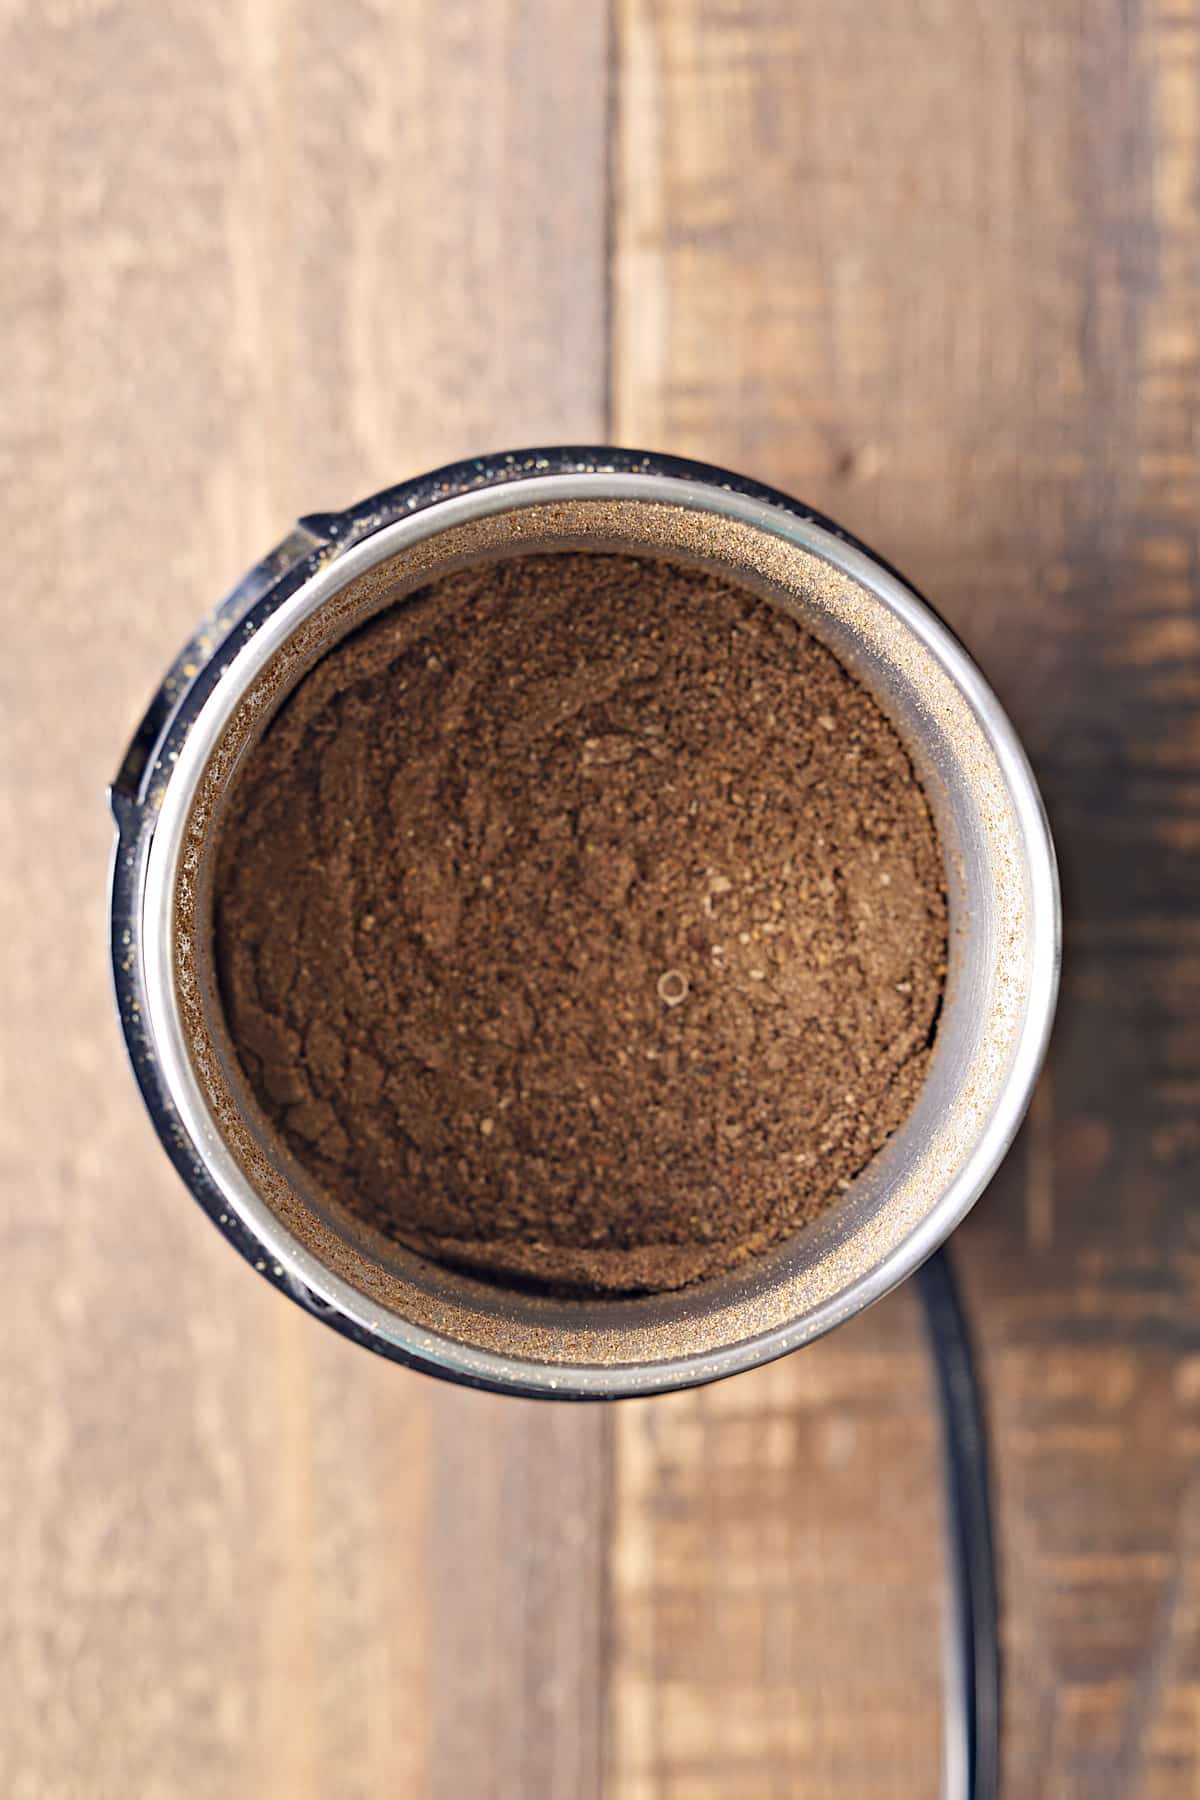 spices in grinder that has alread been turned to powder